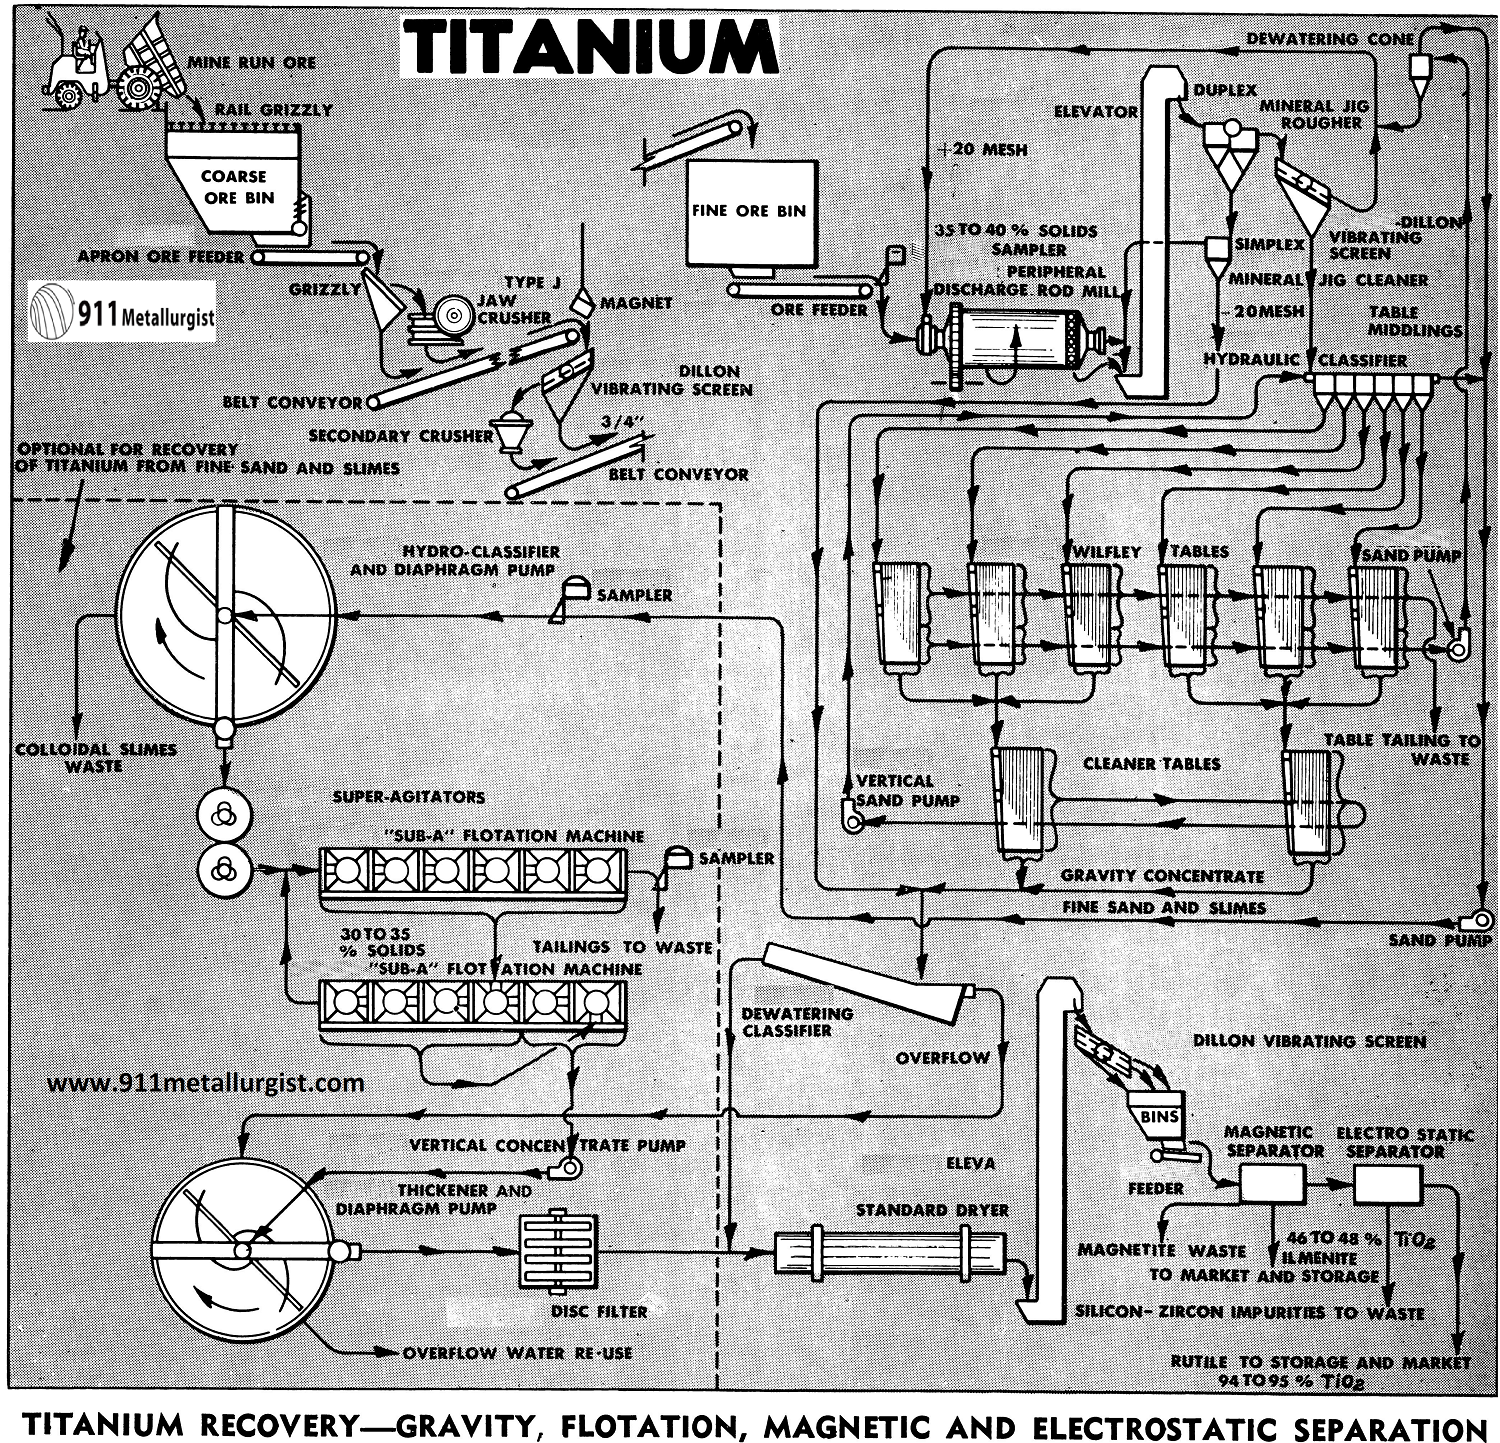 Titanium Recovery—Gravity, Flotation, Magnetic and Electrstatic Separation